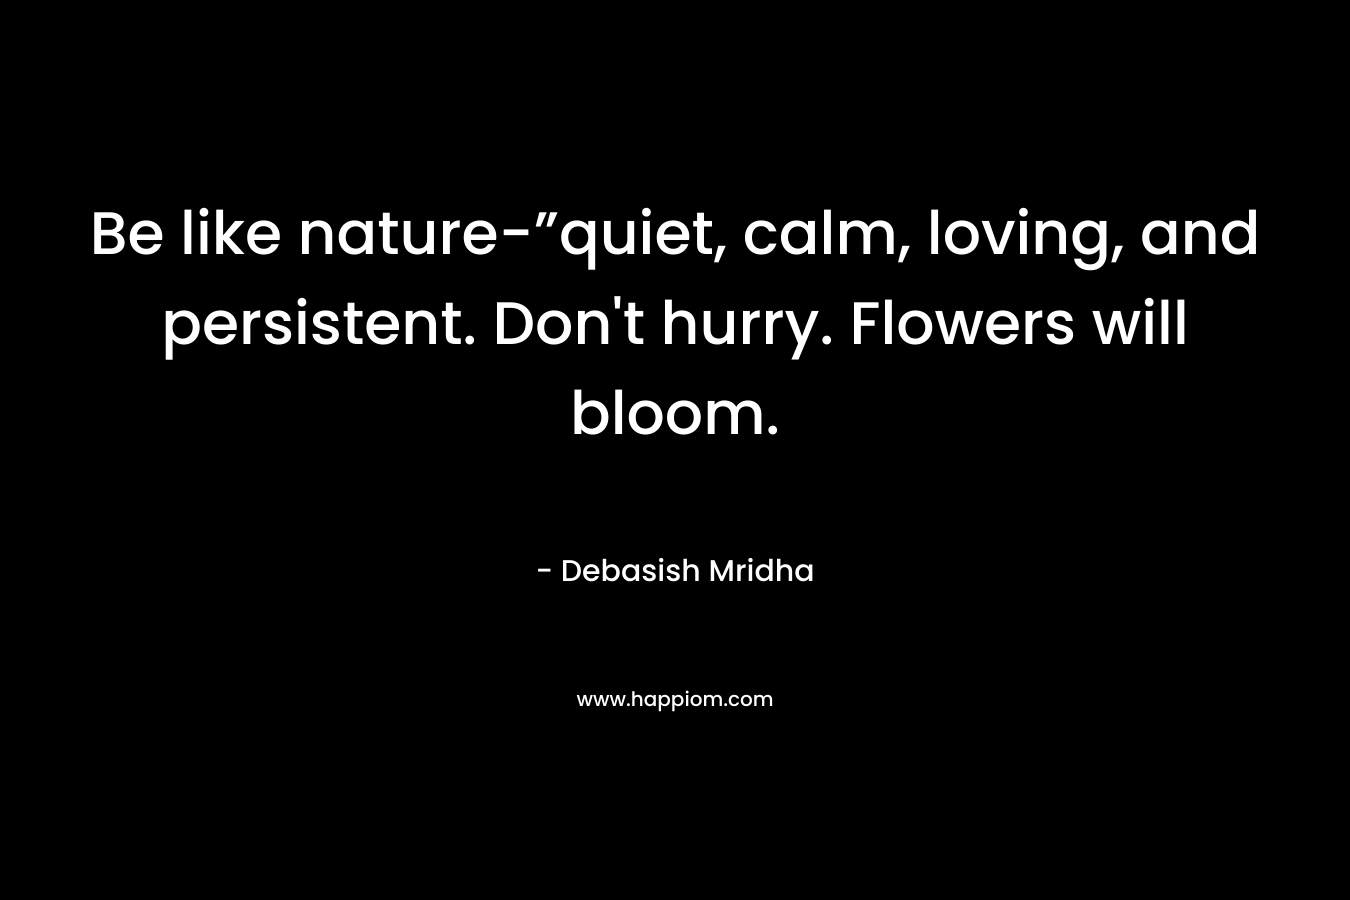 Be like nature-”quiet, calm, loving, and persistent. Don't hurry. Flowers will bloom.